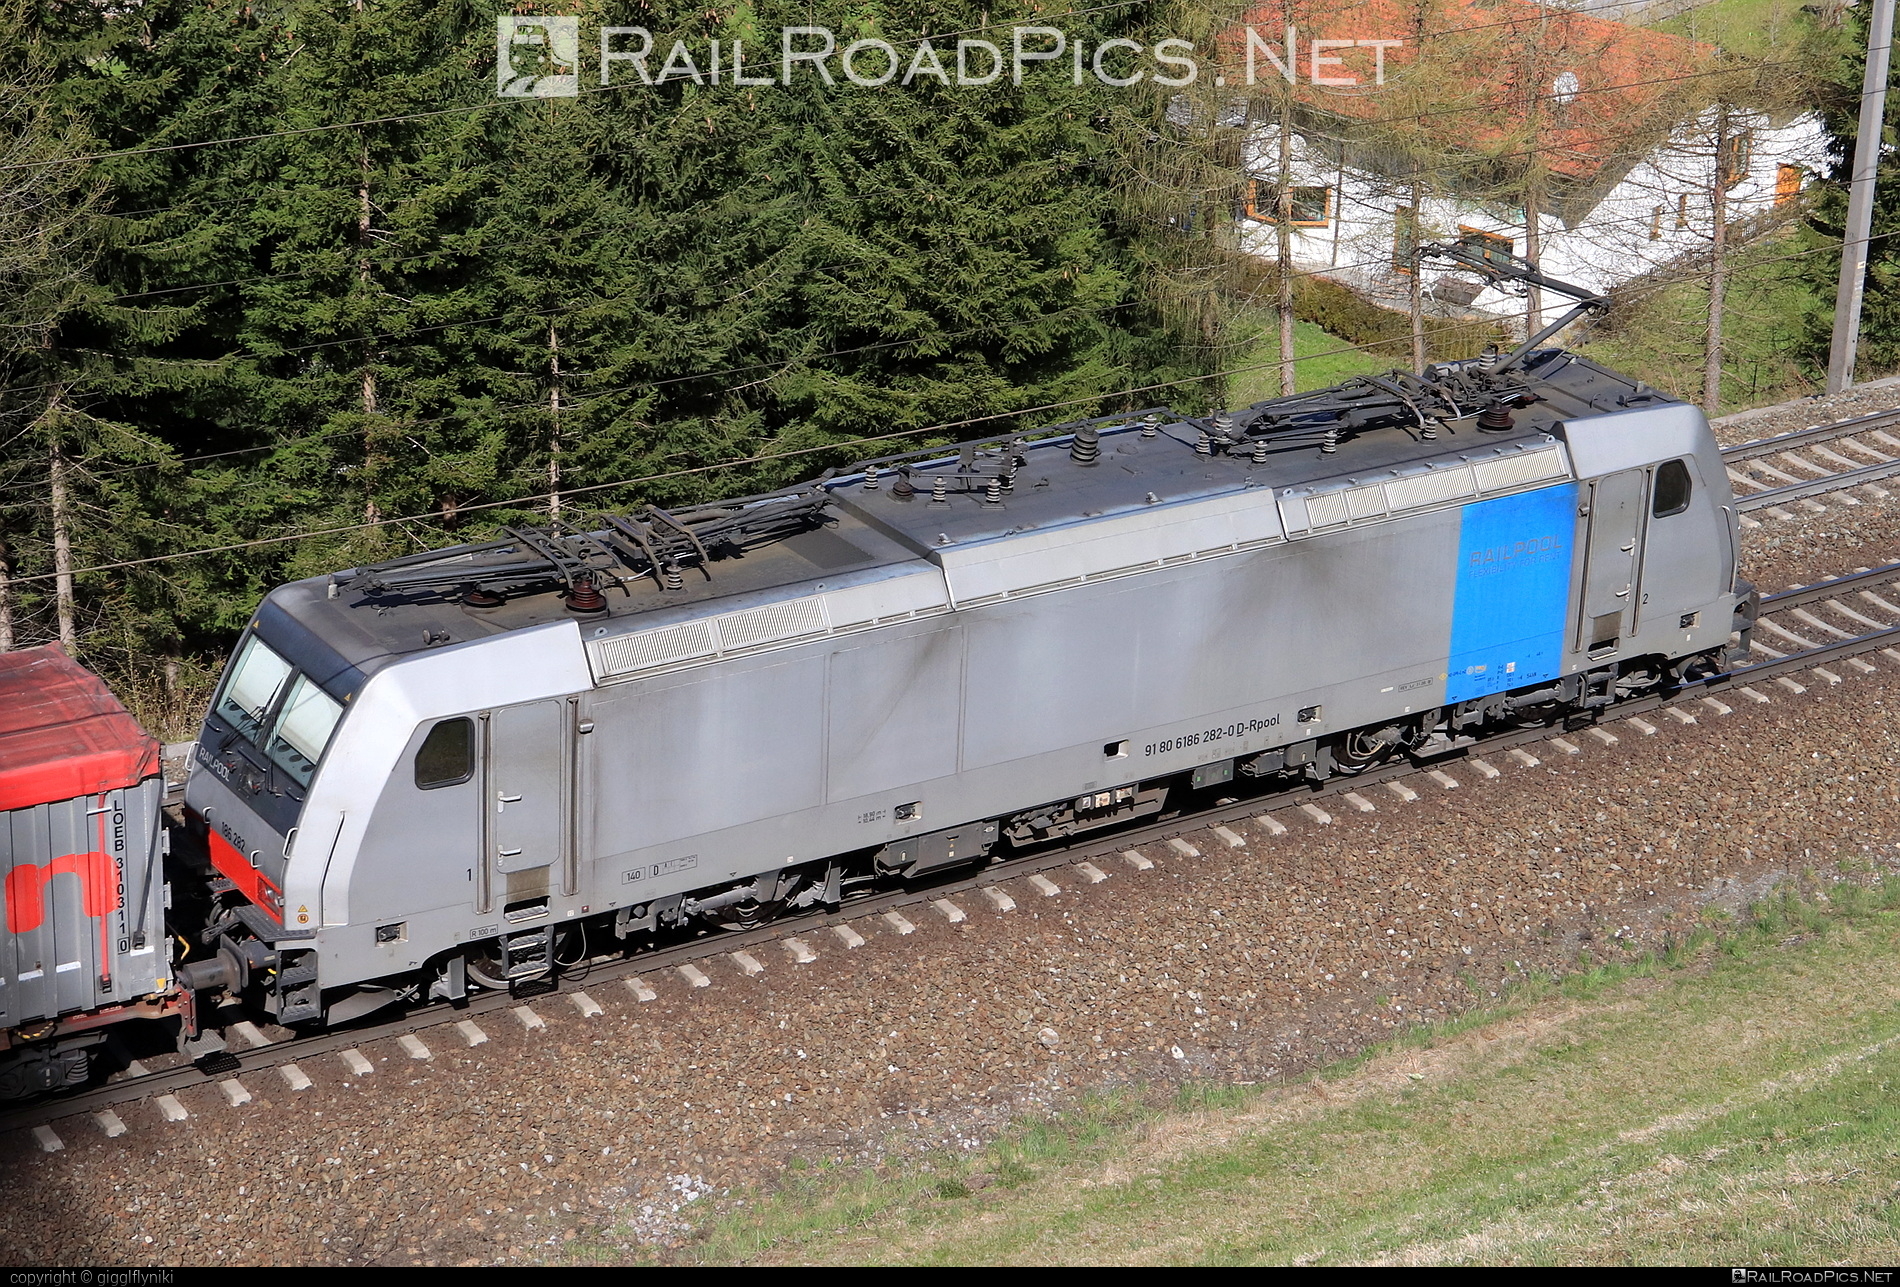 Bombardier TRAXX F140 MS - 186 282 operated by Rail Cargo Carrier – Italy s.r.l #bombardier #bombardiertraxx #railpool #railpoolgmbh #rccit #traxx #traxxf140 #traxxf140ms